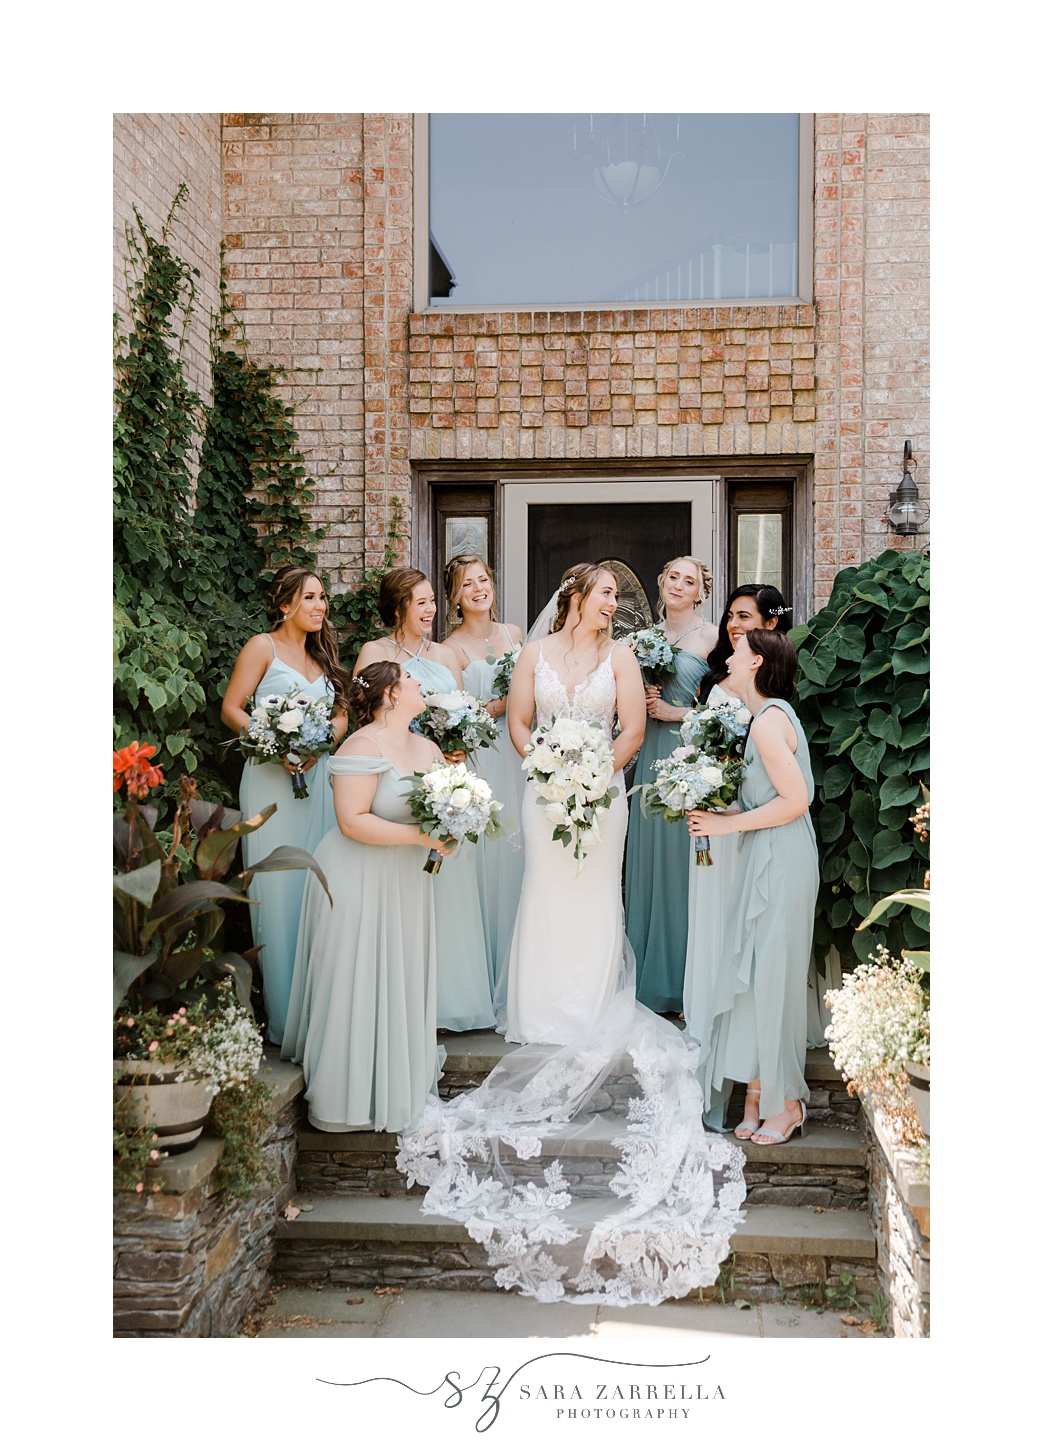 bride stands on steps of brick building with bridesmaids around her in green gowns